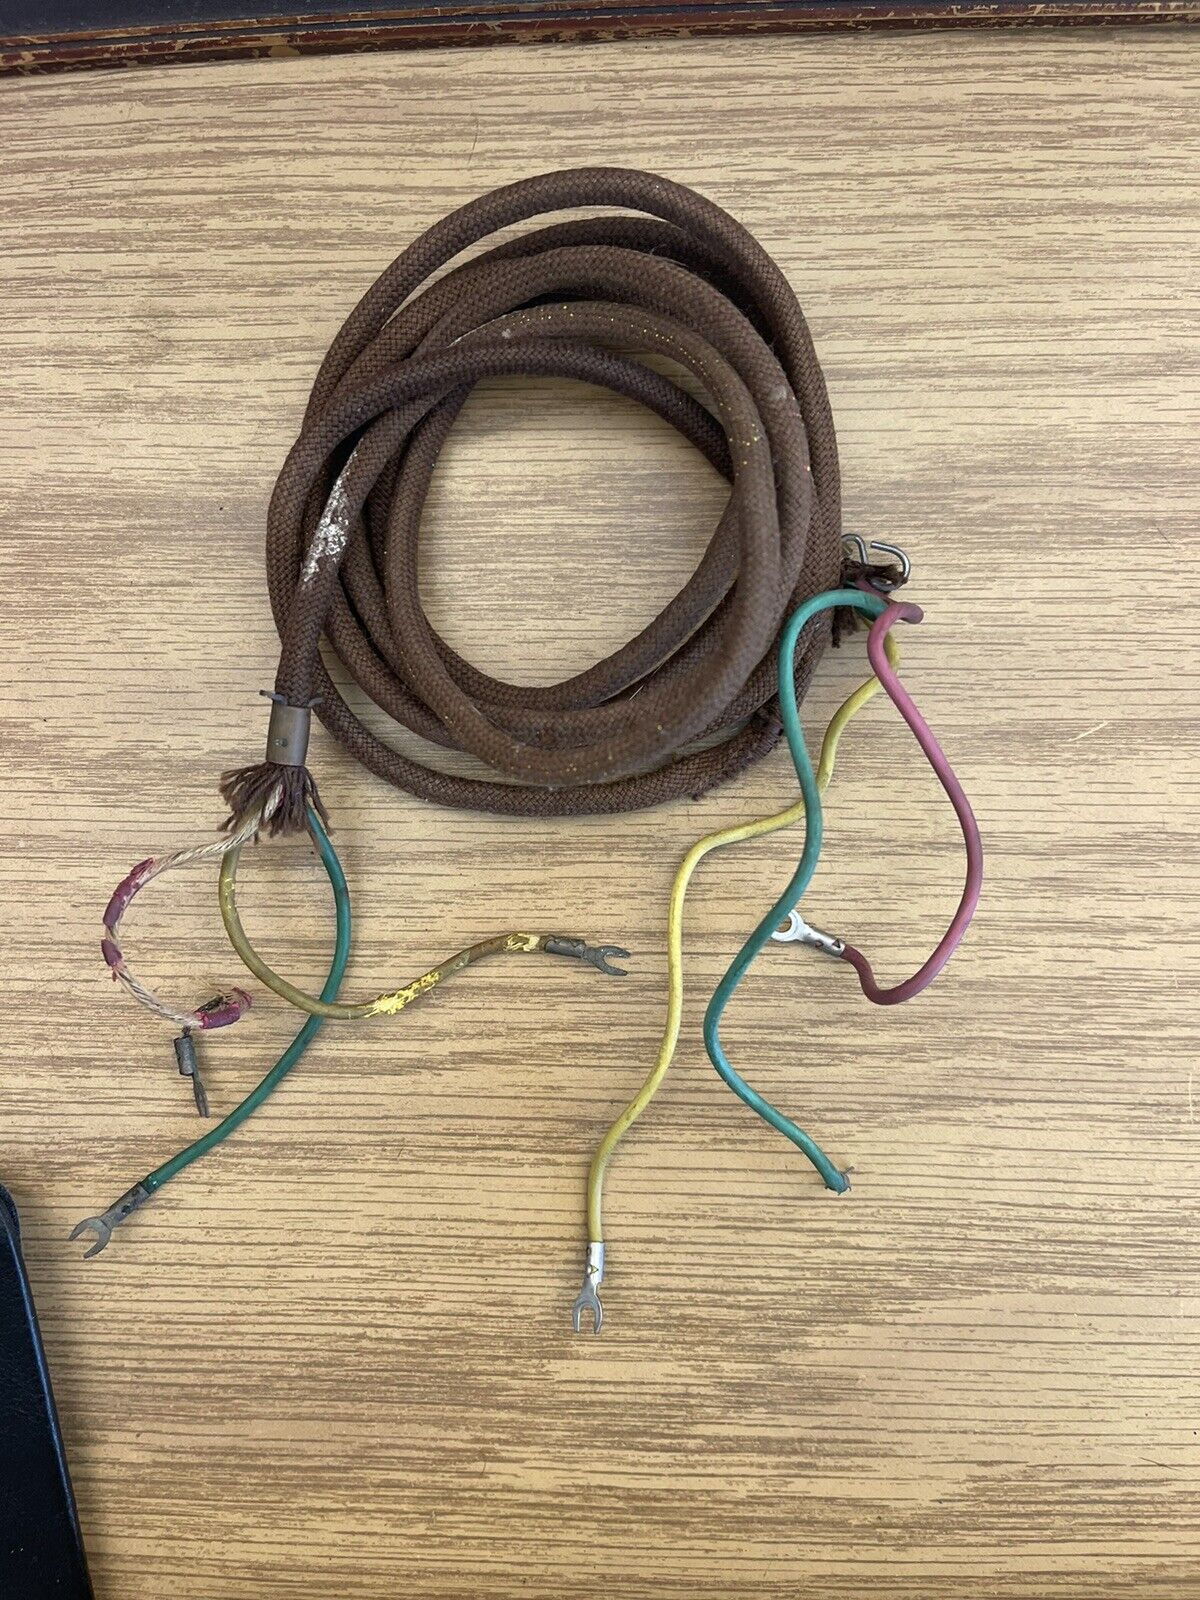 Western Electric D3AL Cloth Telephone Line Cord- Has a Little Dry Rot 5-6' L